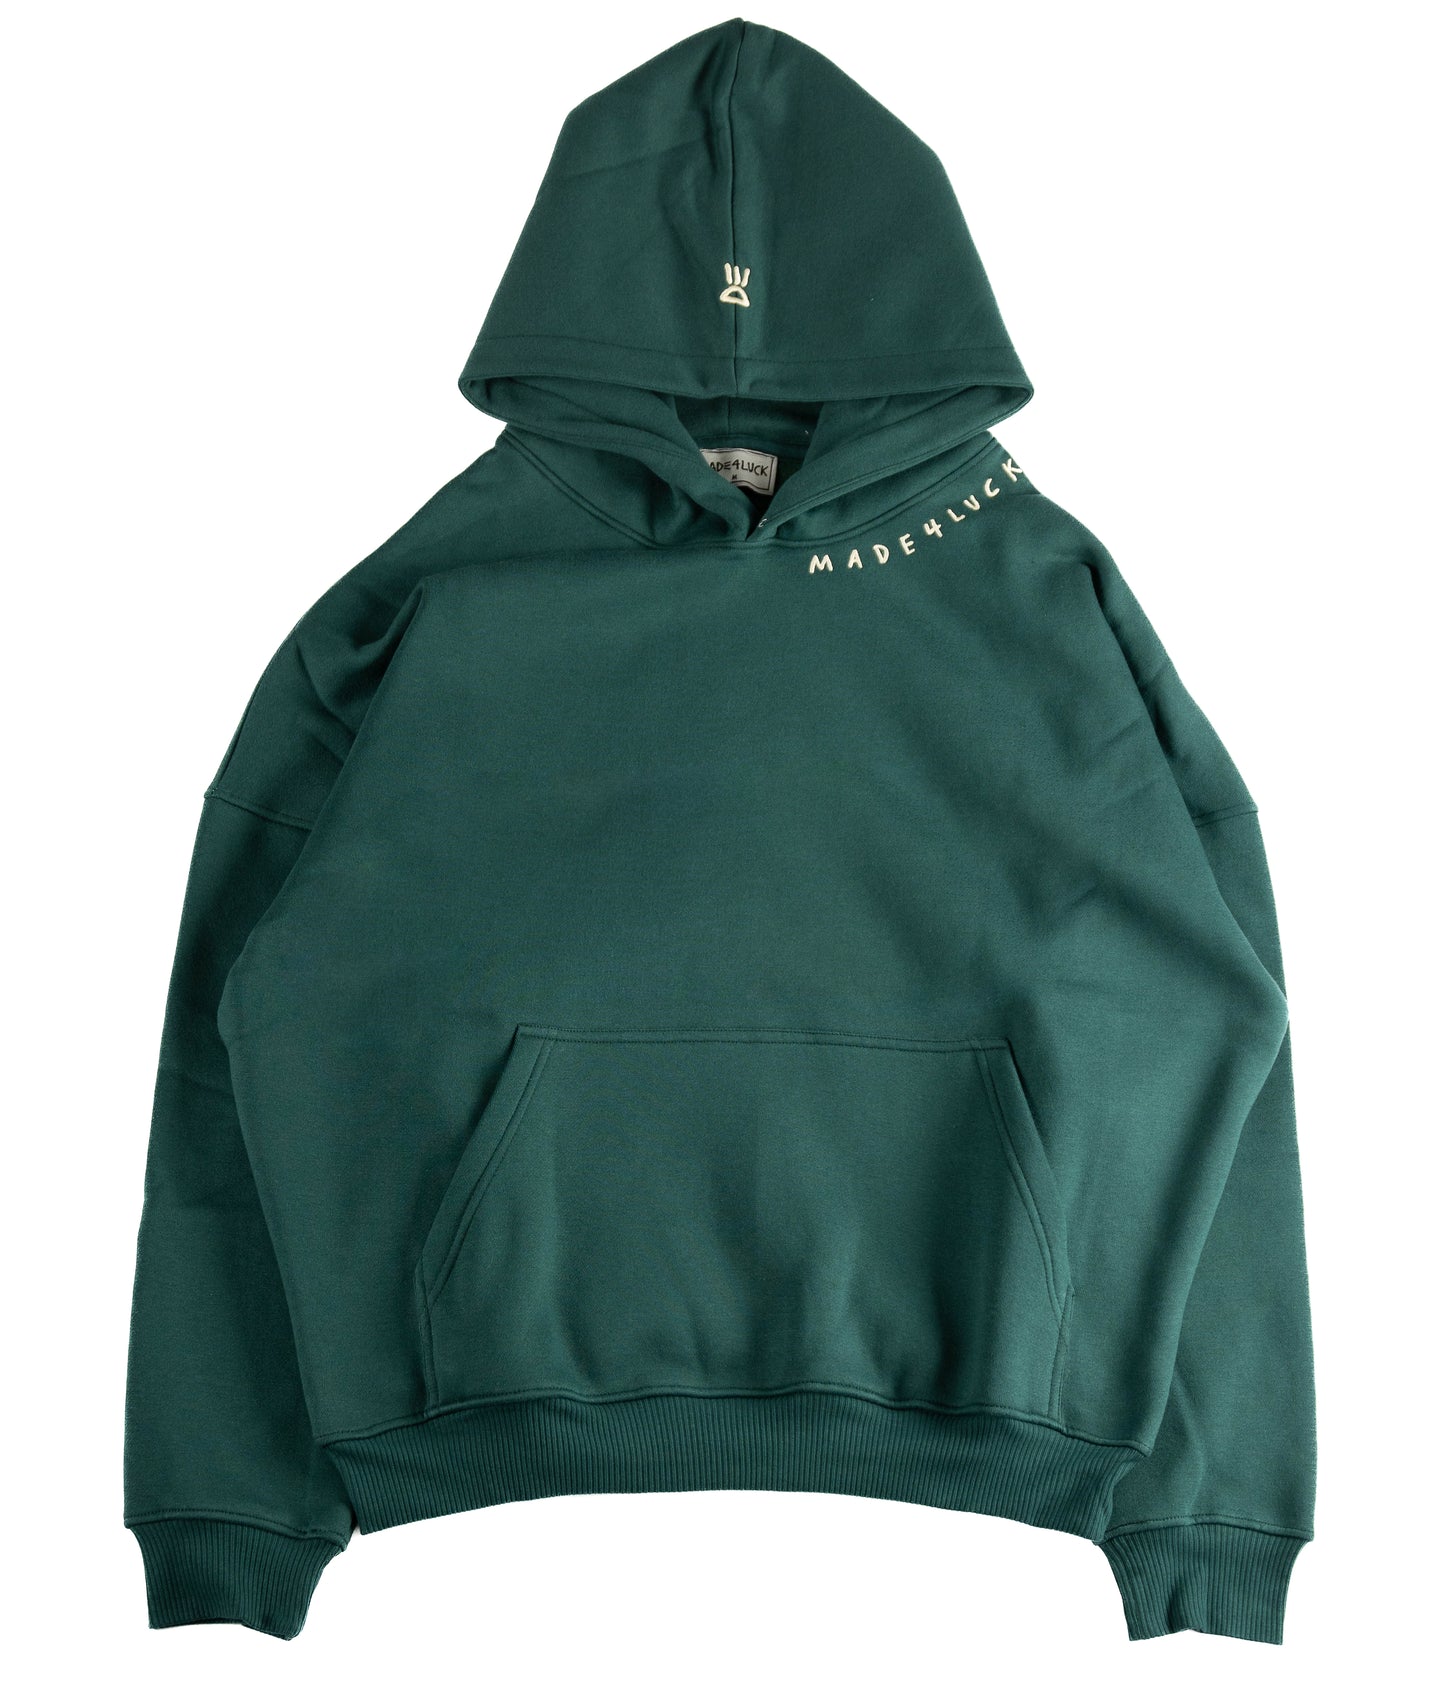 Green abyss small city big dreams hoodie